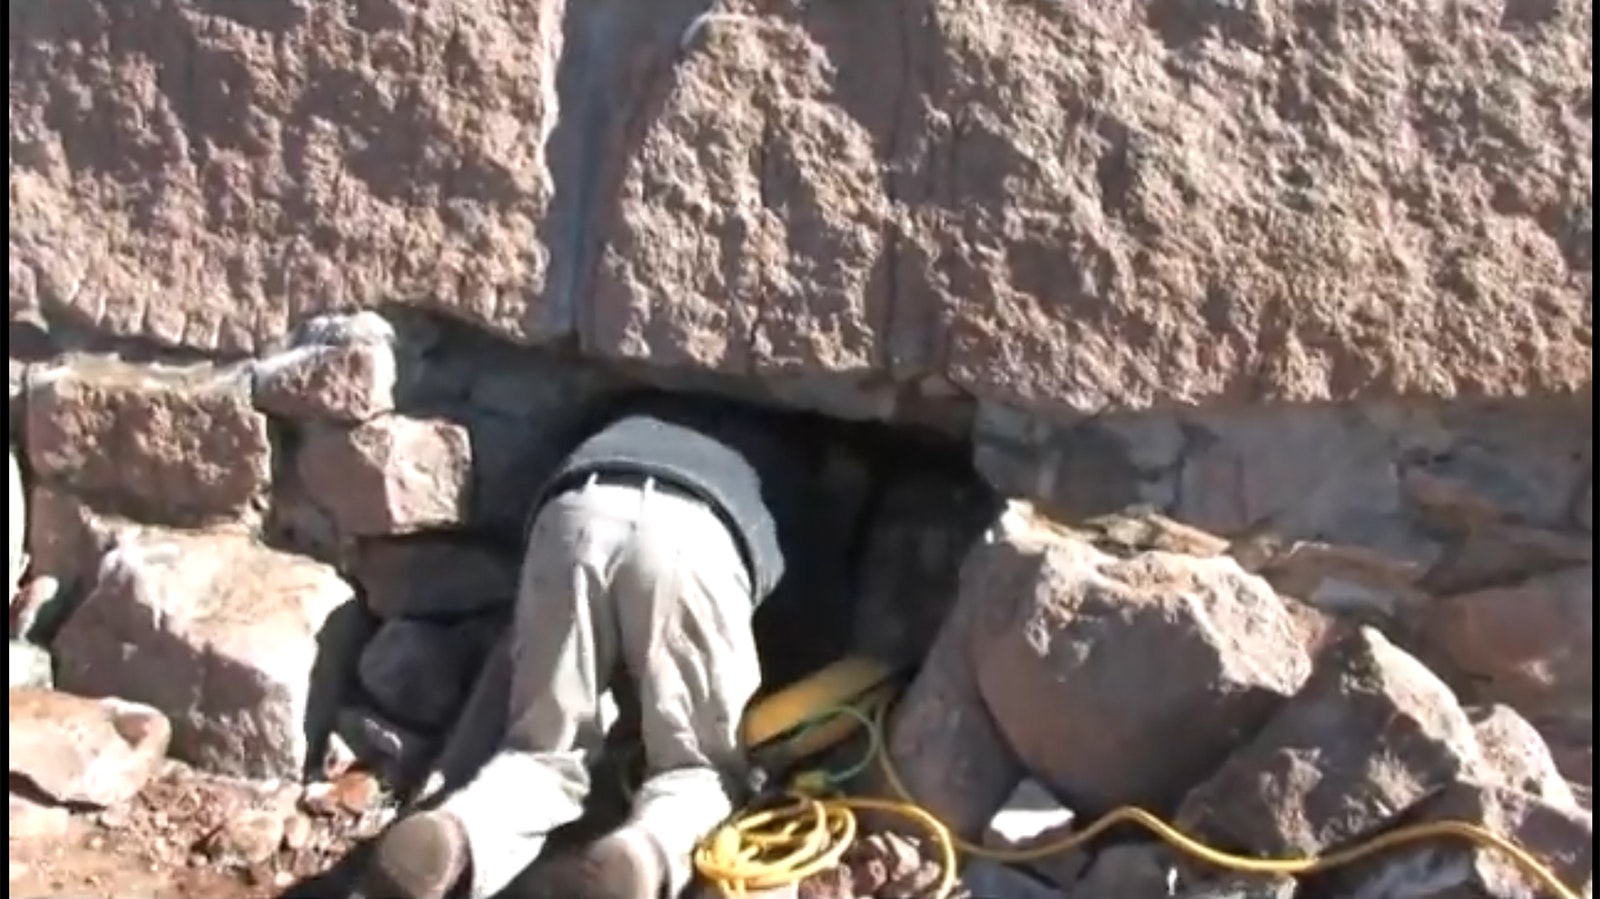 Officials broke into the Ames Monument pyramid in 2010 to access the tunnels inside, as seen in this image taken from a Wyoming State Parks YouTube video.